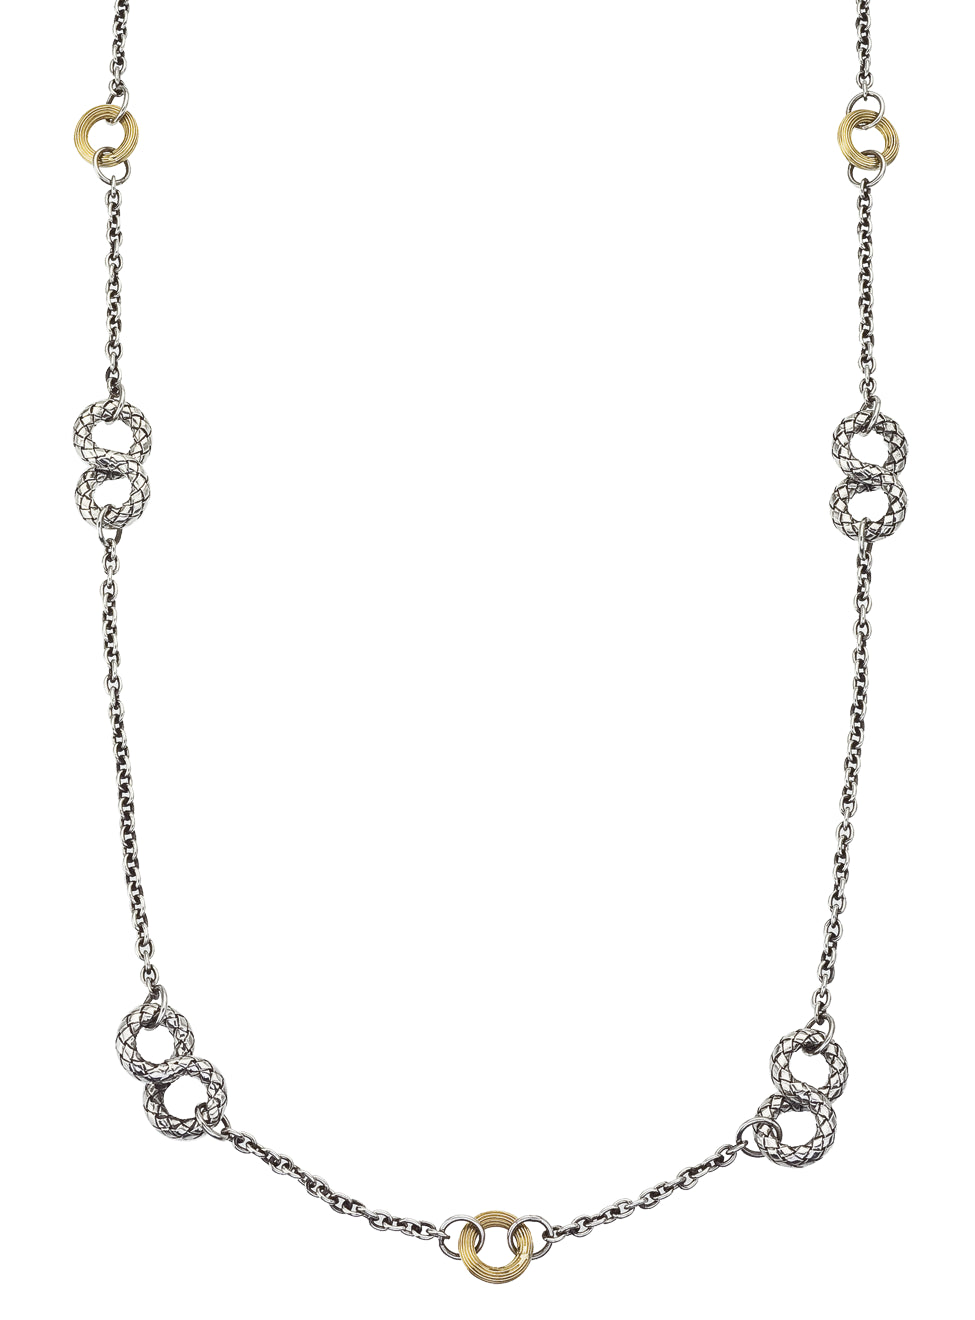 title:Alisa Women's Sterling Silver & 18K Gold 17 in. Necklace;color:not applicable